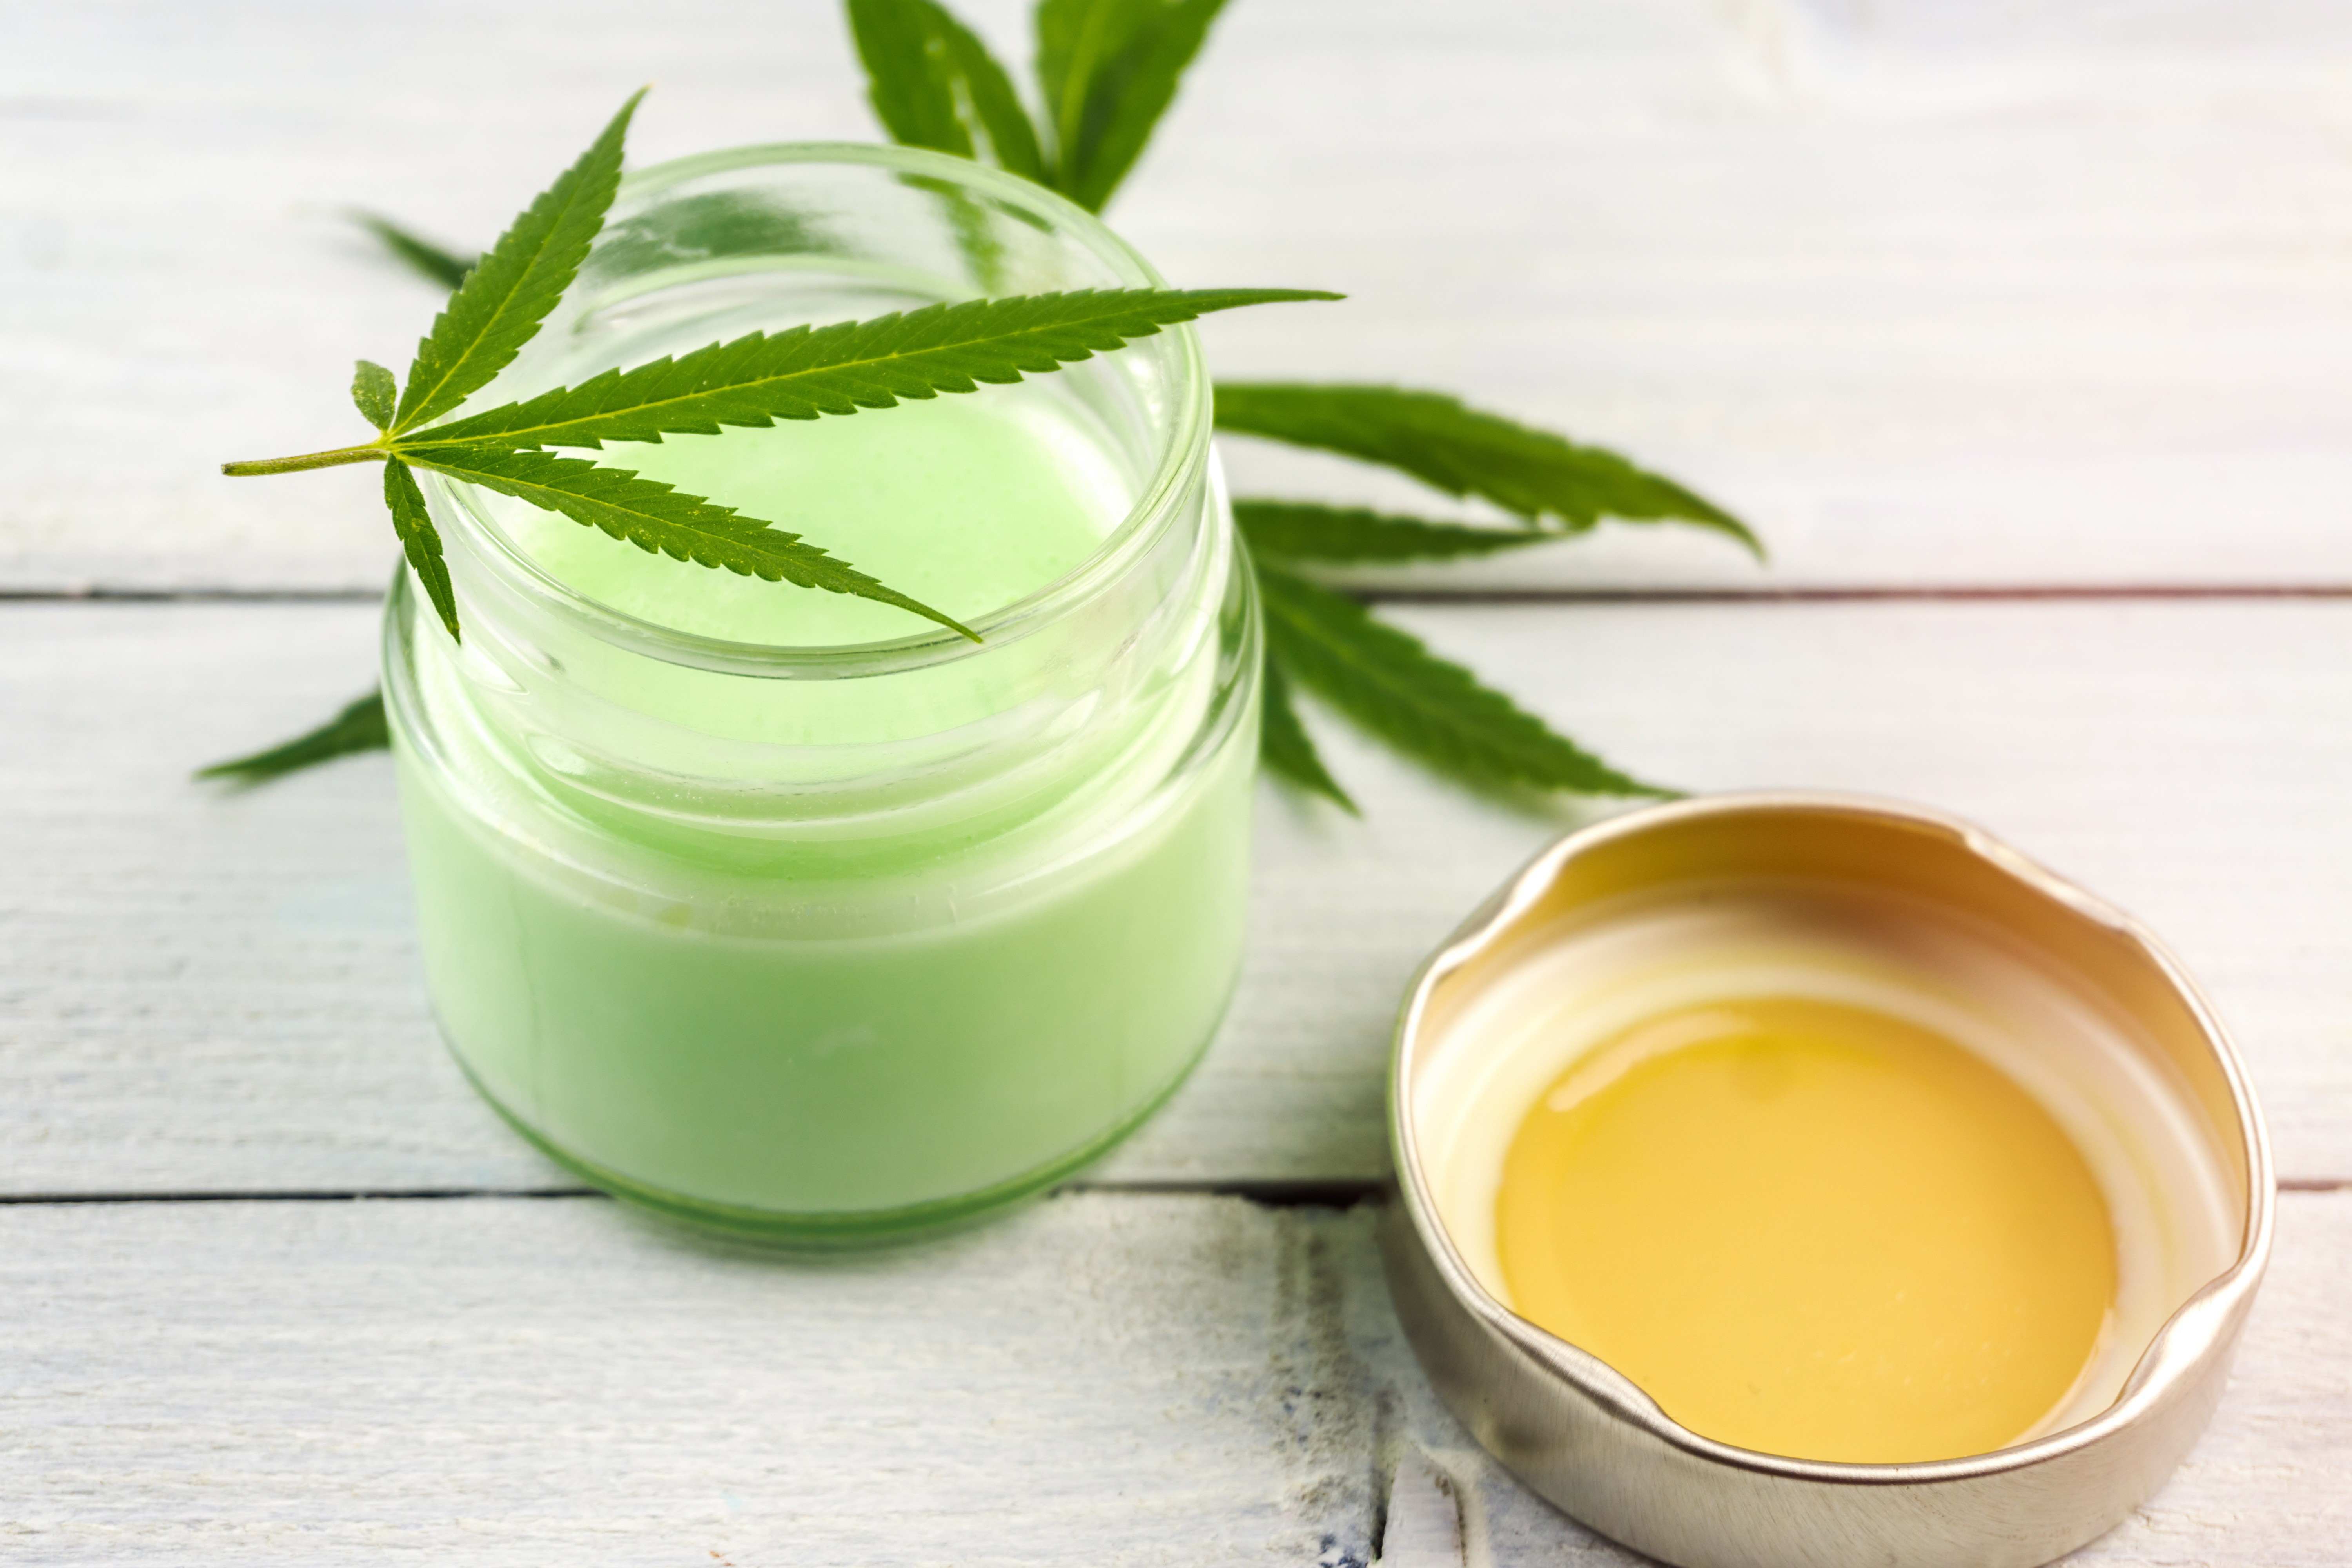 CBD derived from hemp, a type of cannabis that doesn’t get you high, is expected to find its way into a big range of US skincare, cosmetic and beauty products in coming years. Its pain relief and anti-ageing properties are attracting a lot of interest. Photo: Shutterstock